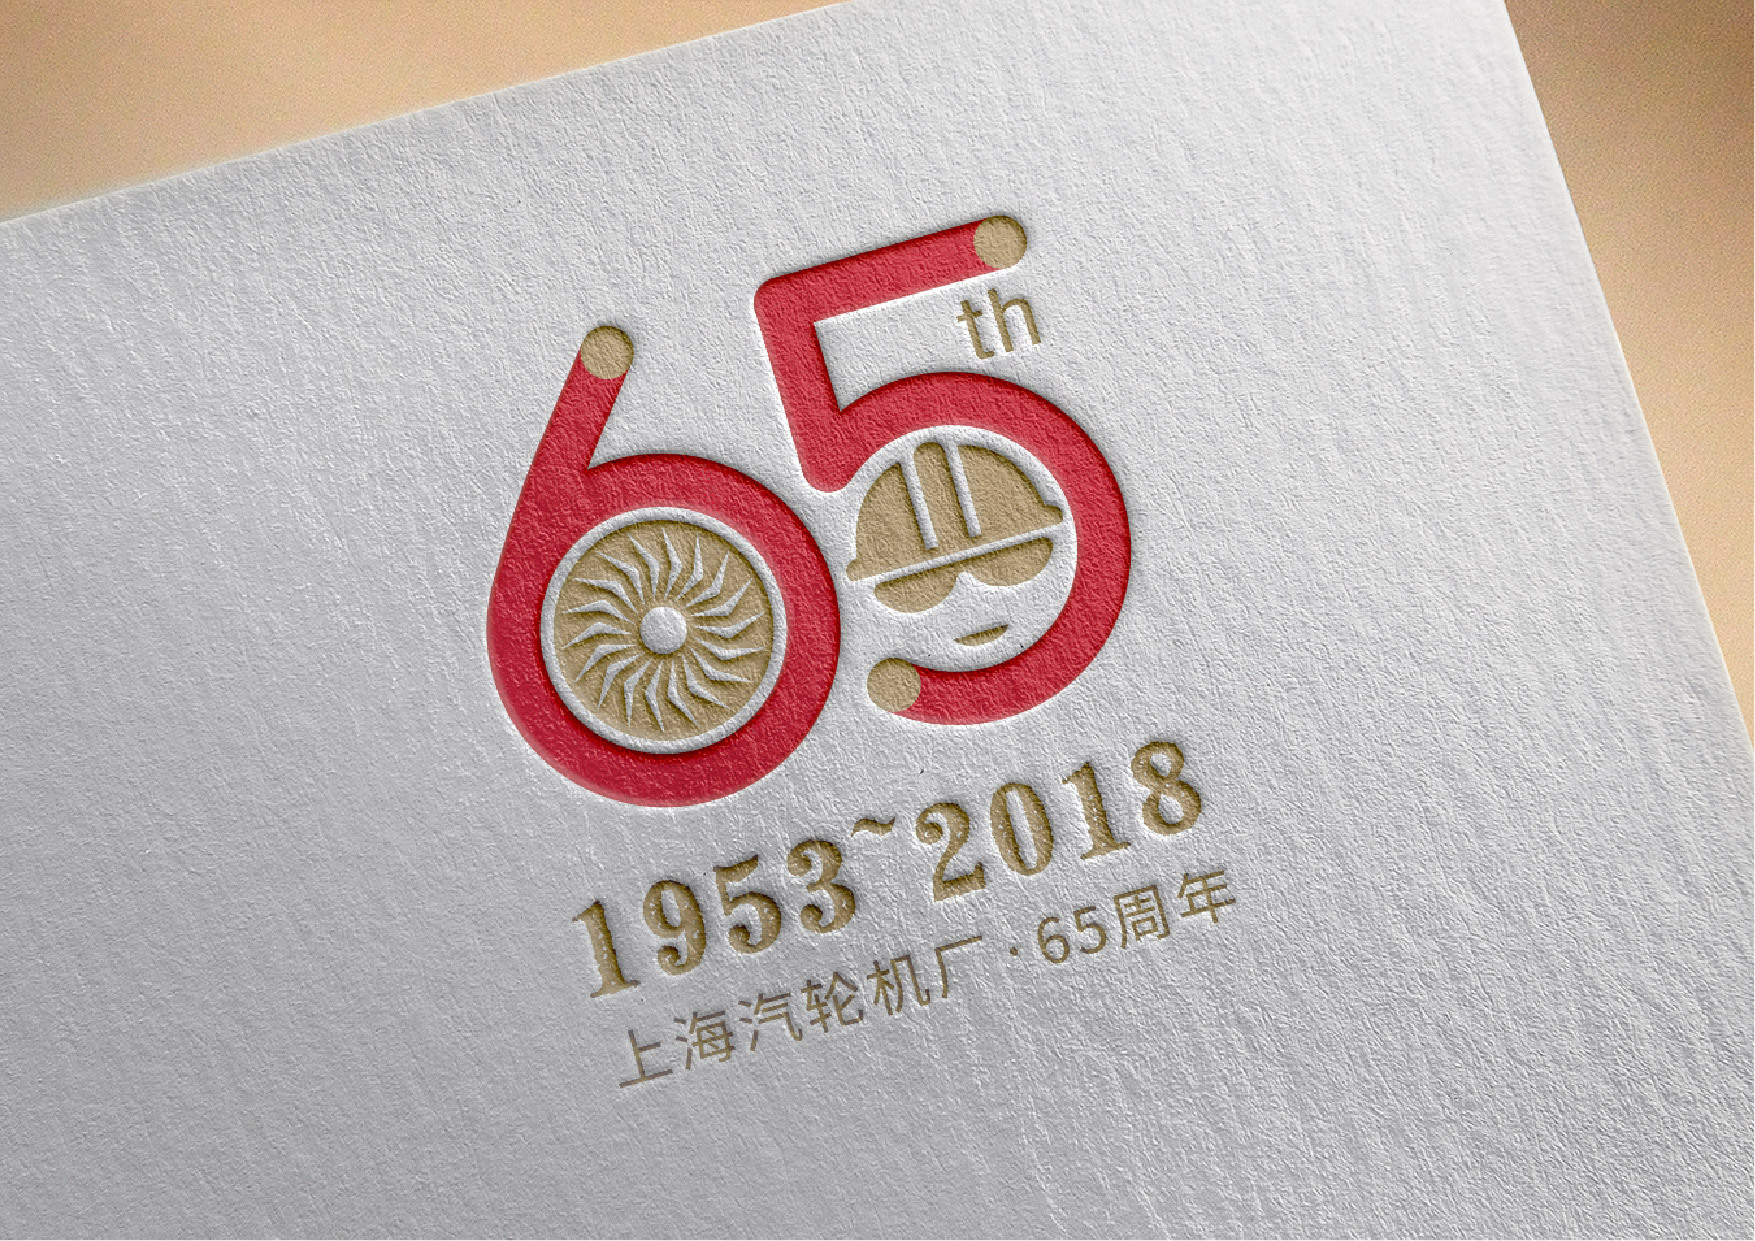 China holds grand gathering marking centenary of CPC - LATEST NEWS ...